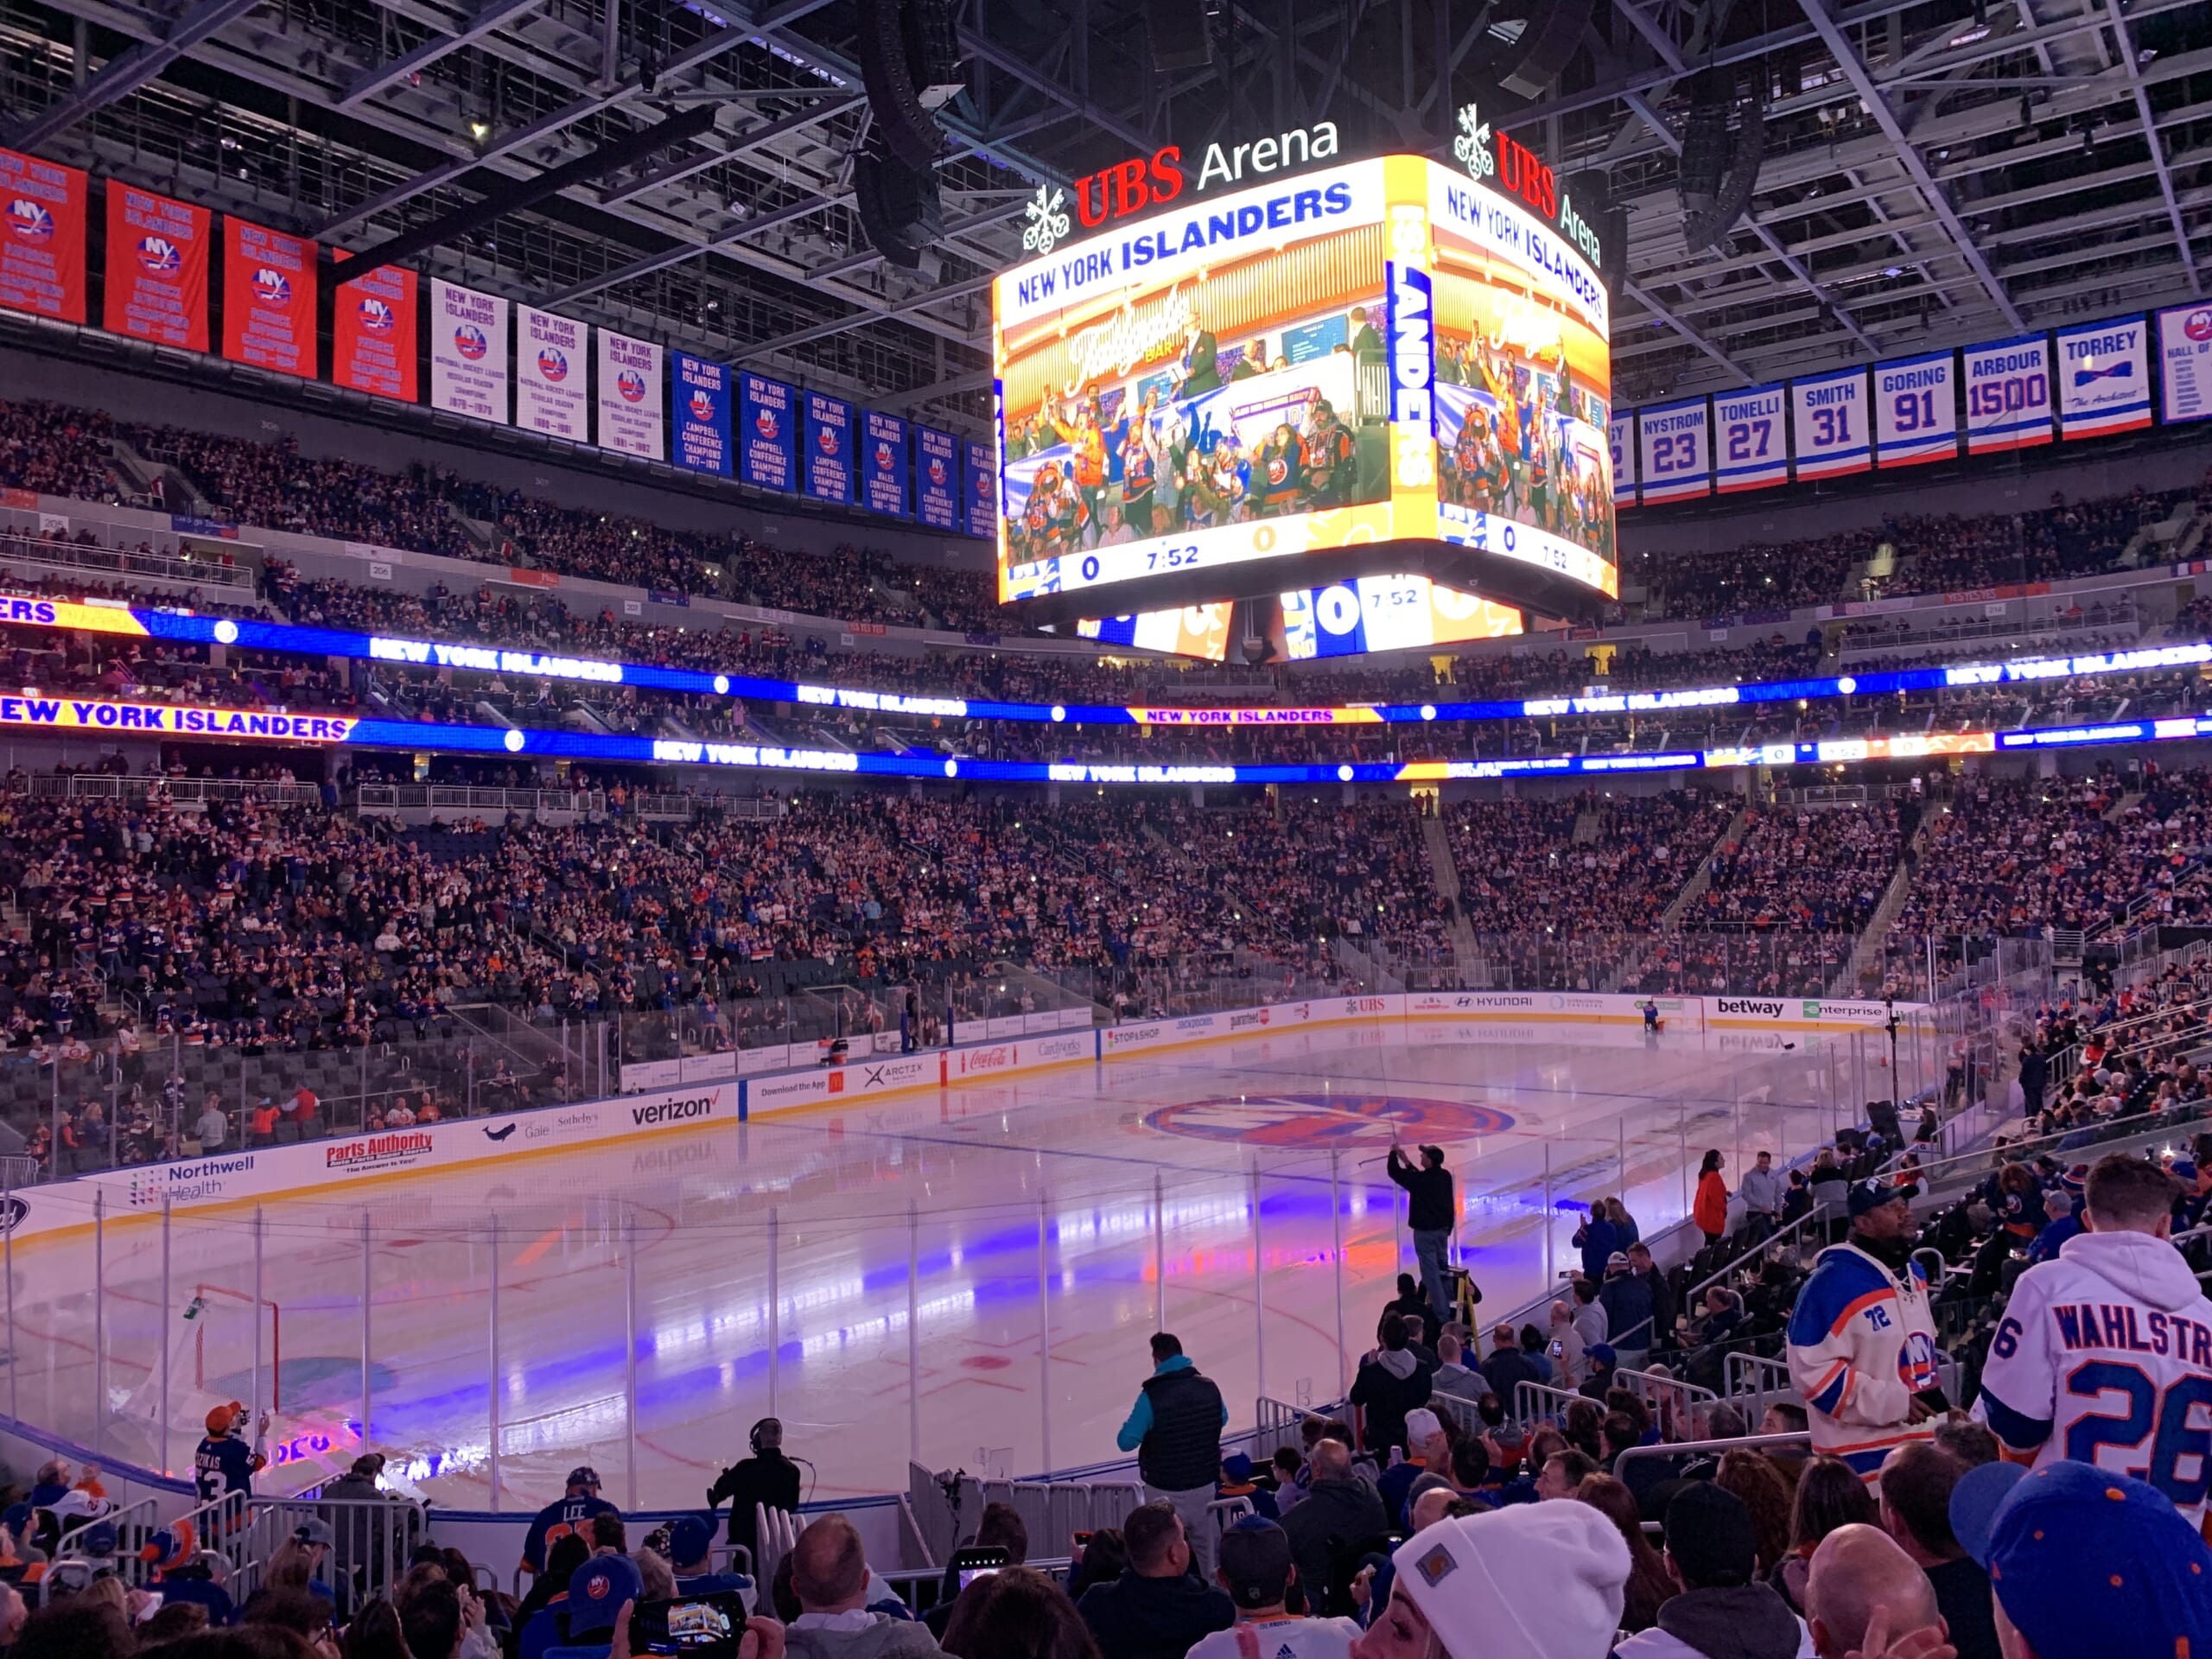 NY Islanders opens its new UBS Arena